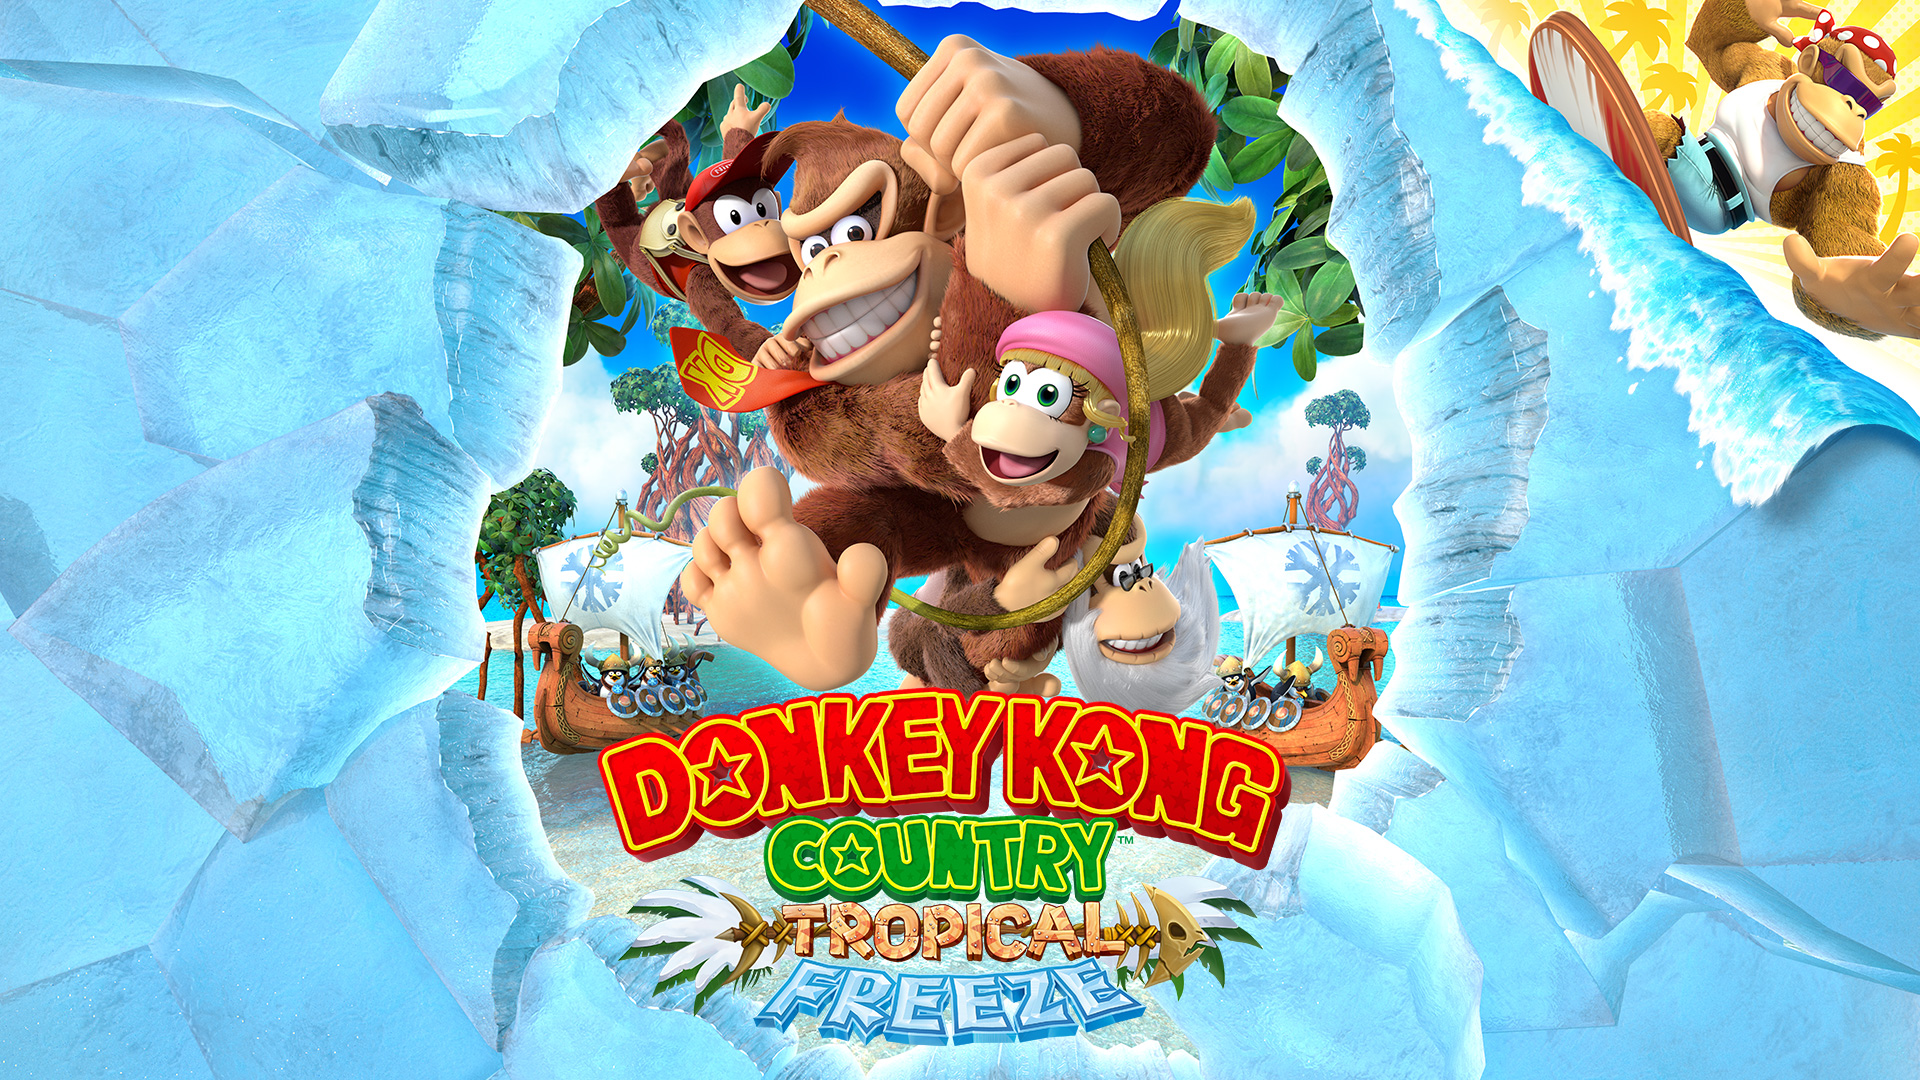 Donkey Kong Country?: Tropical Freeze